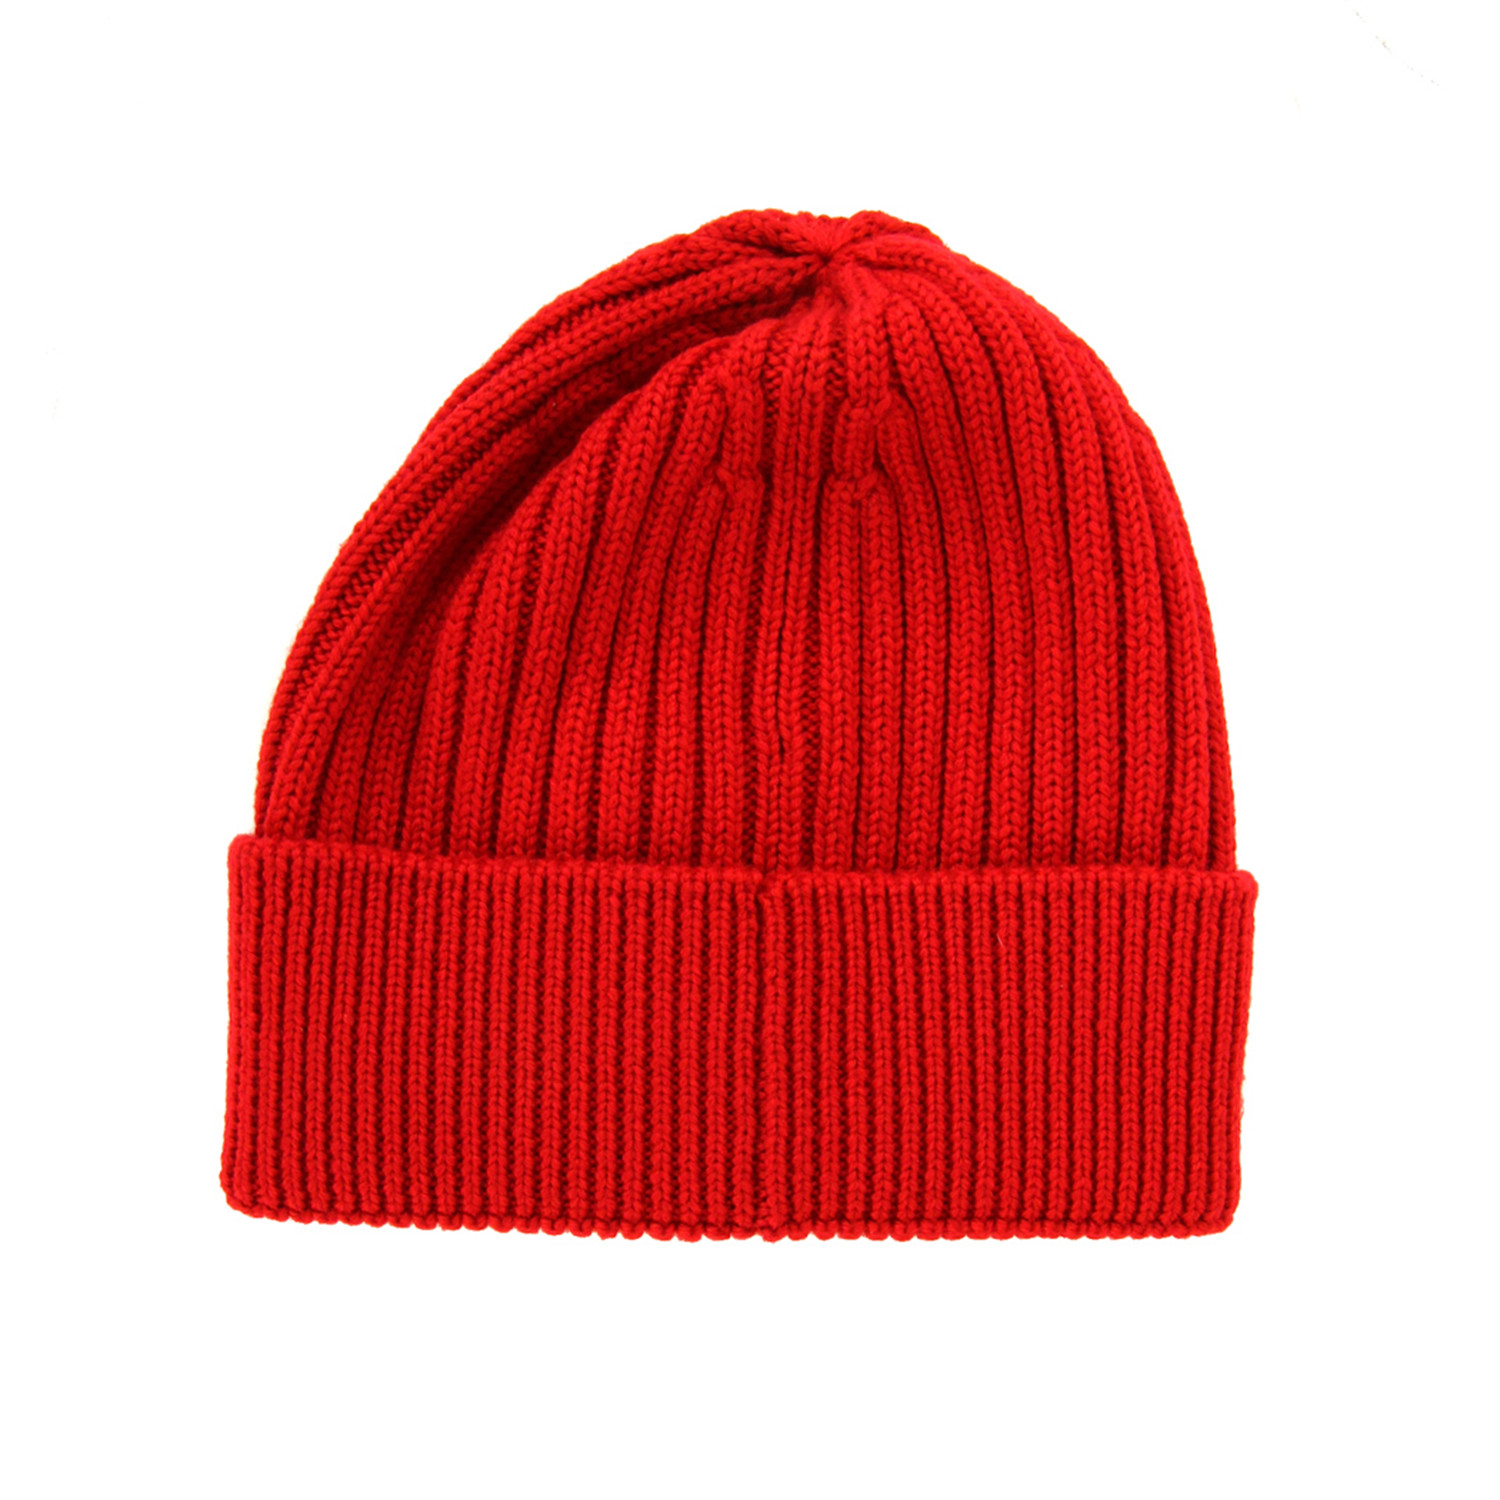 Moncler // Men's Logo Patched Beanie // Red - Canada Goose, Moncler ...